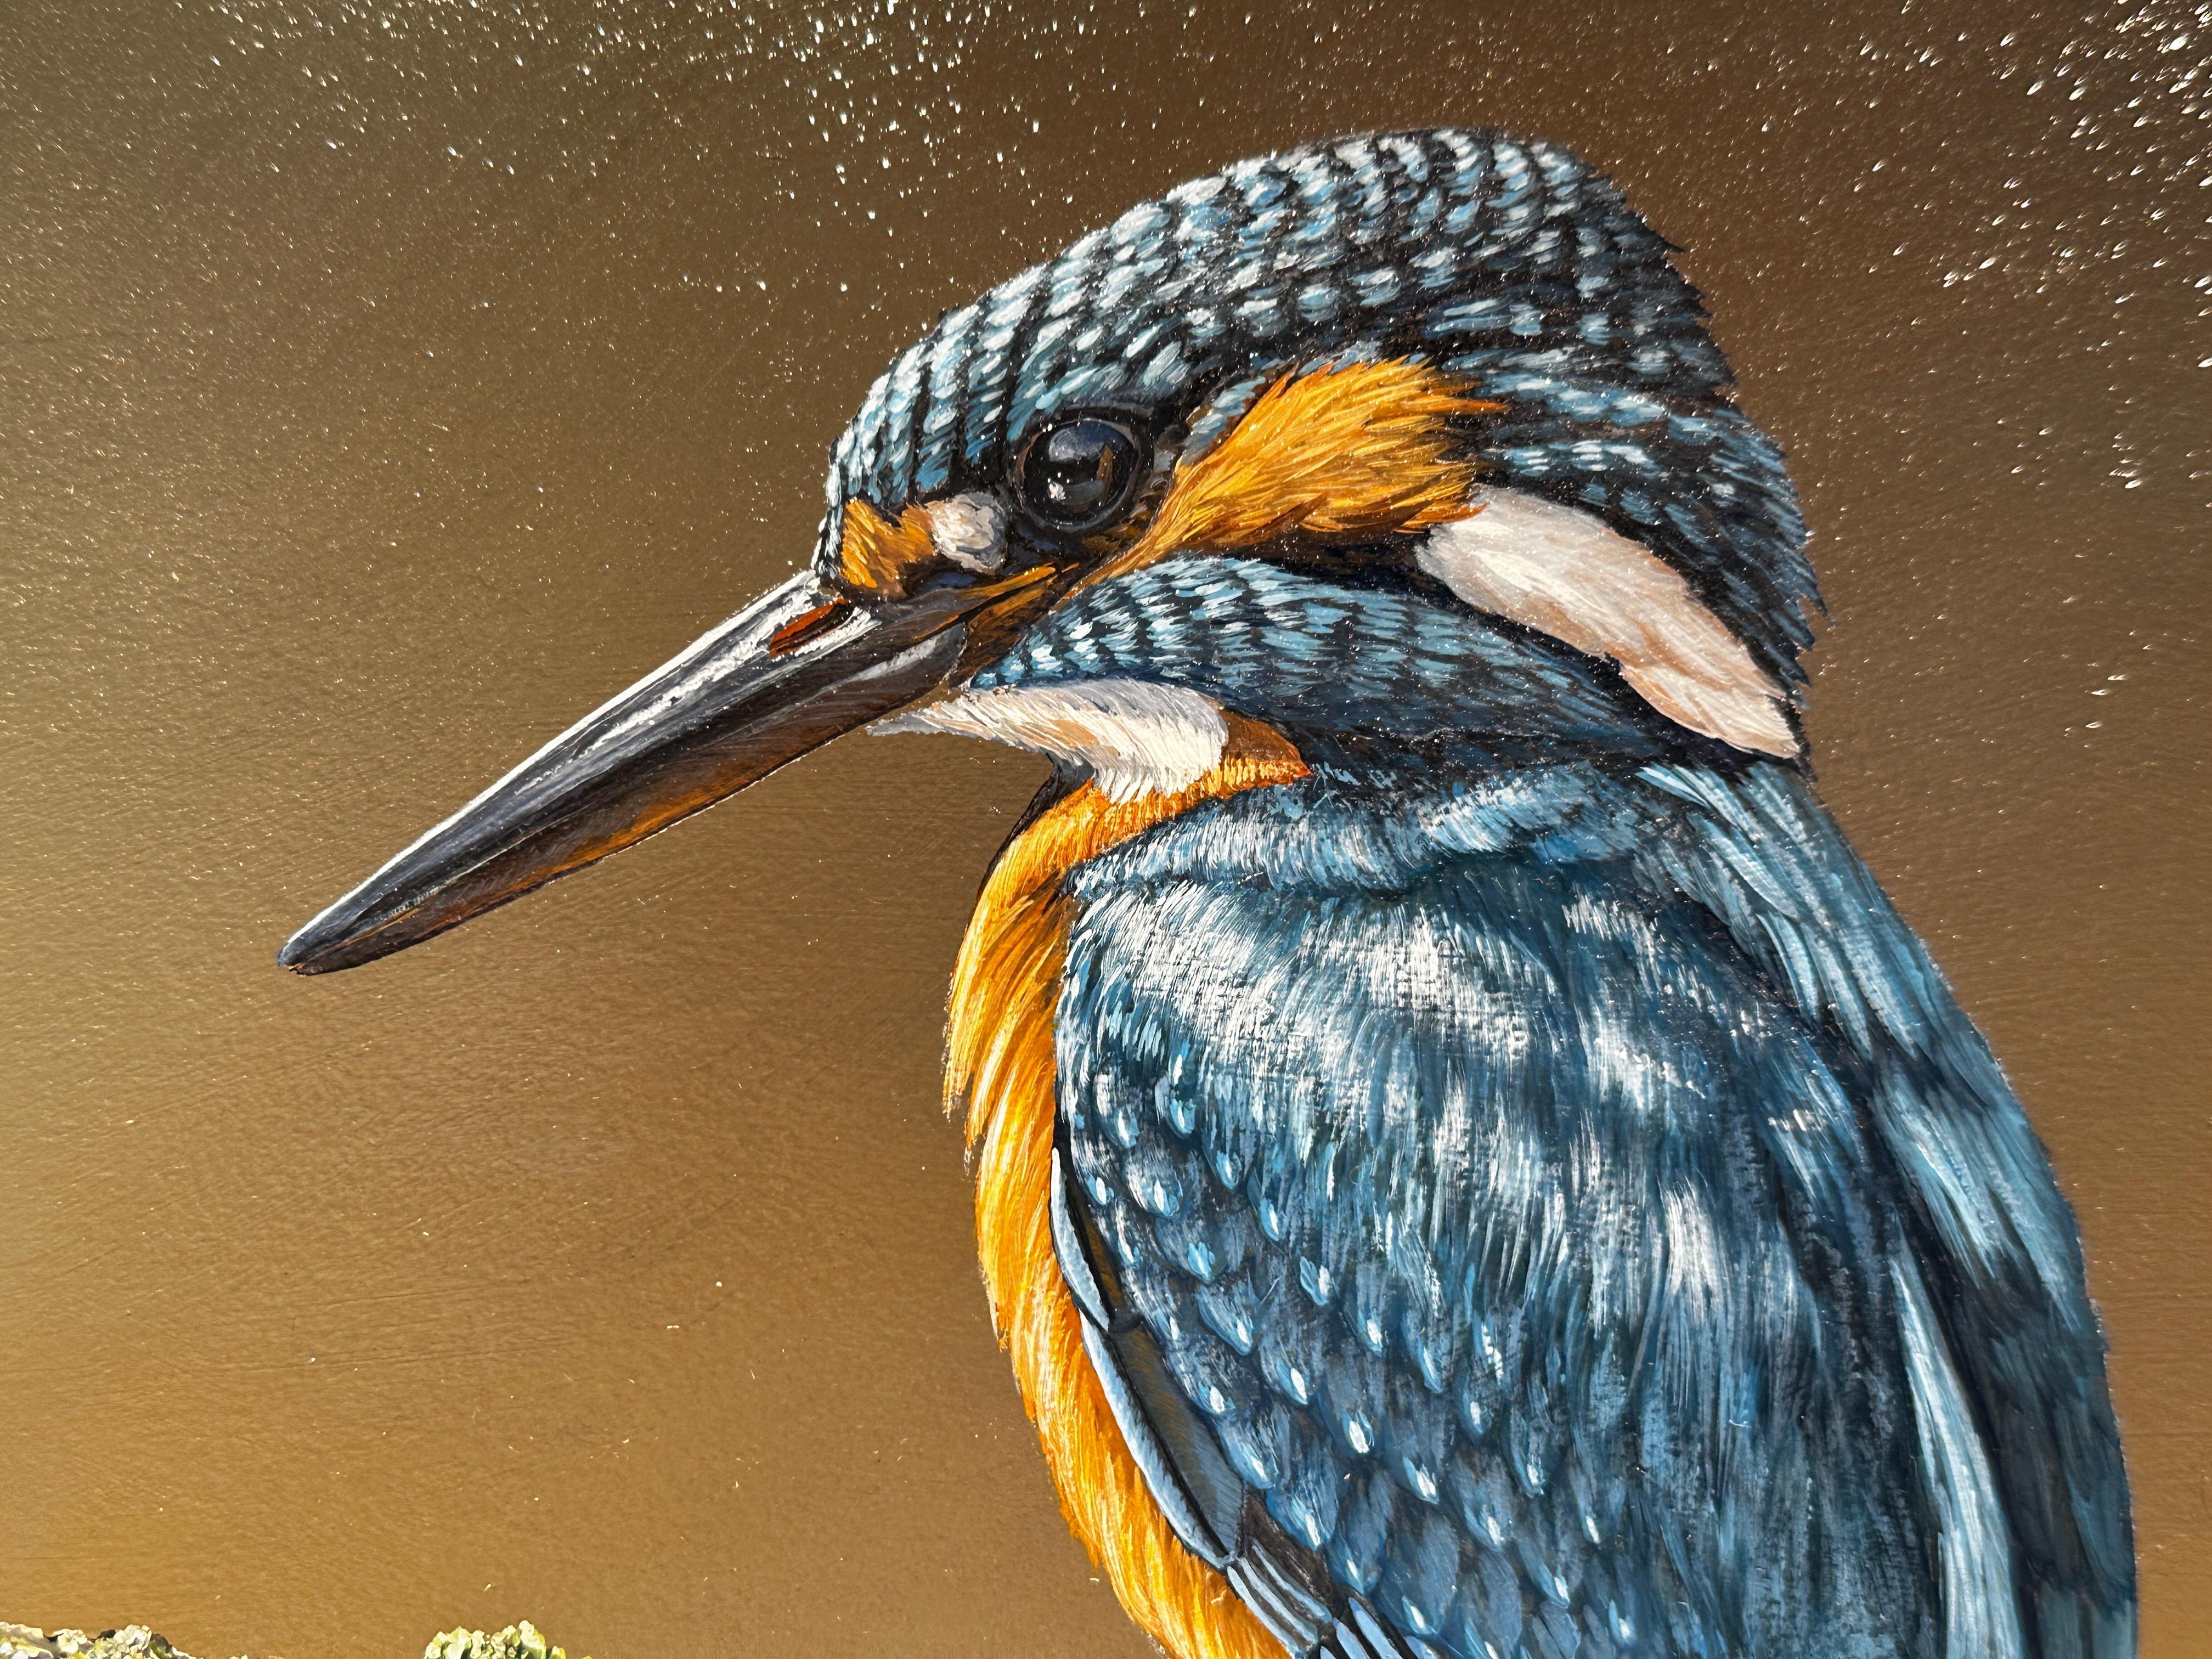 'A Moment rest' Photorealist painting of a Kingfisher in the wild, blue, orange - Painting by Ben Waddams